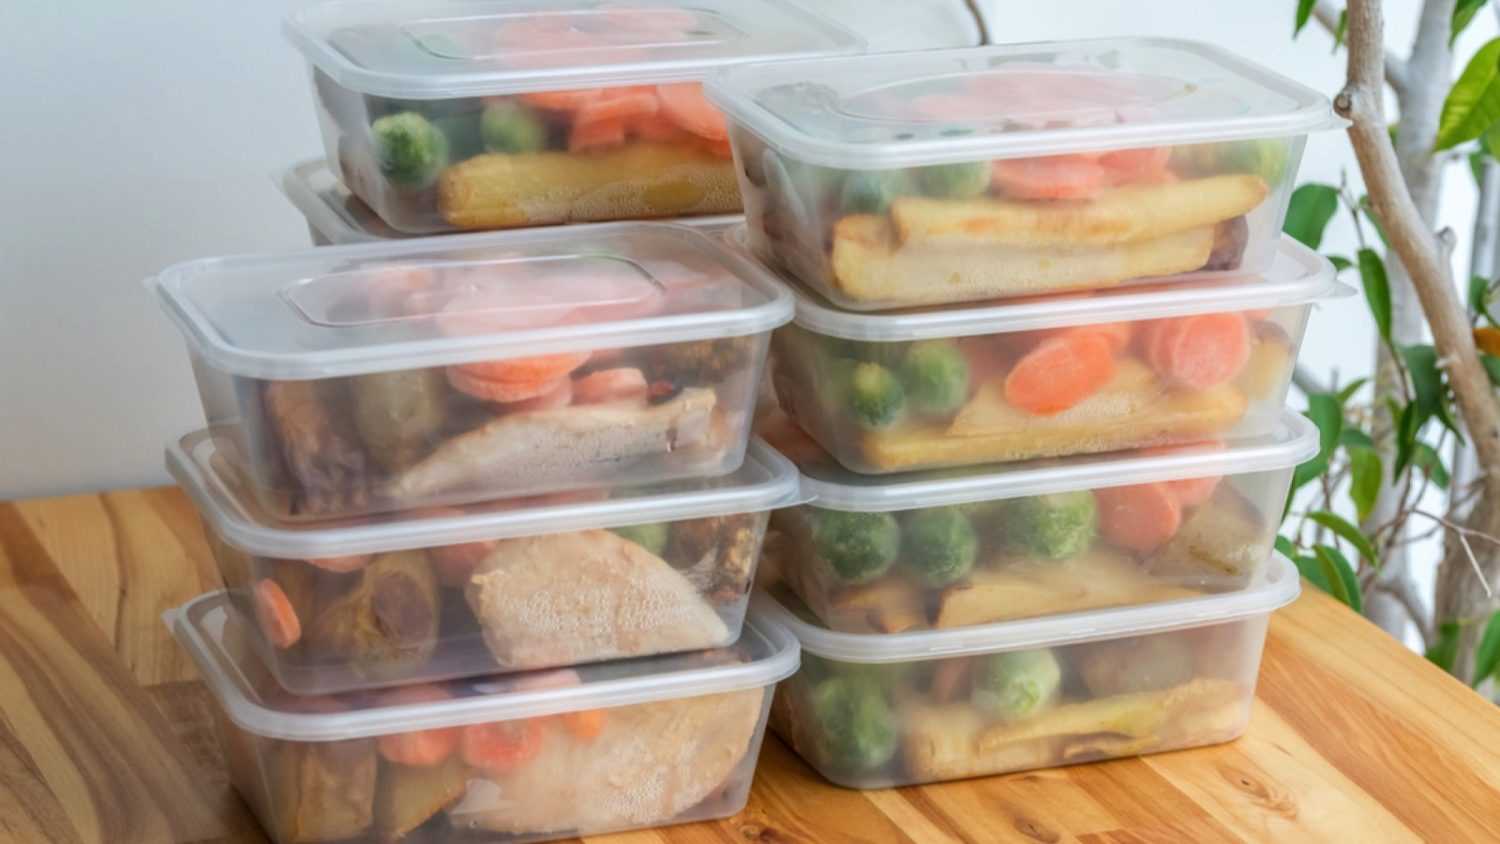 Food stored in containers